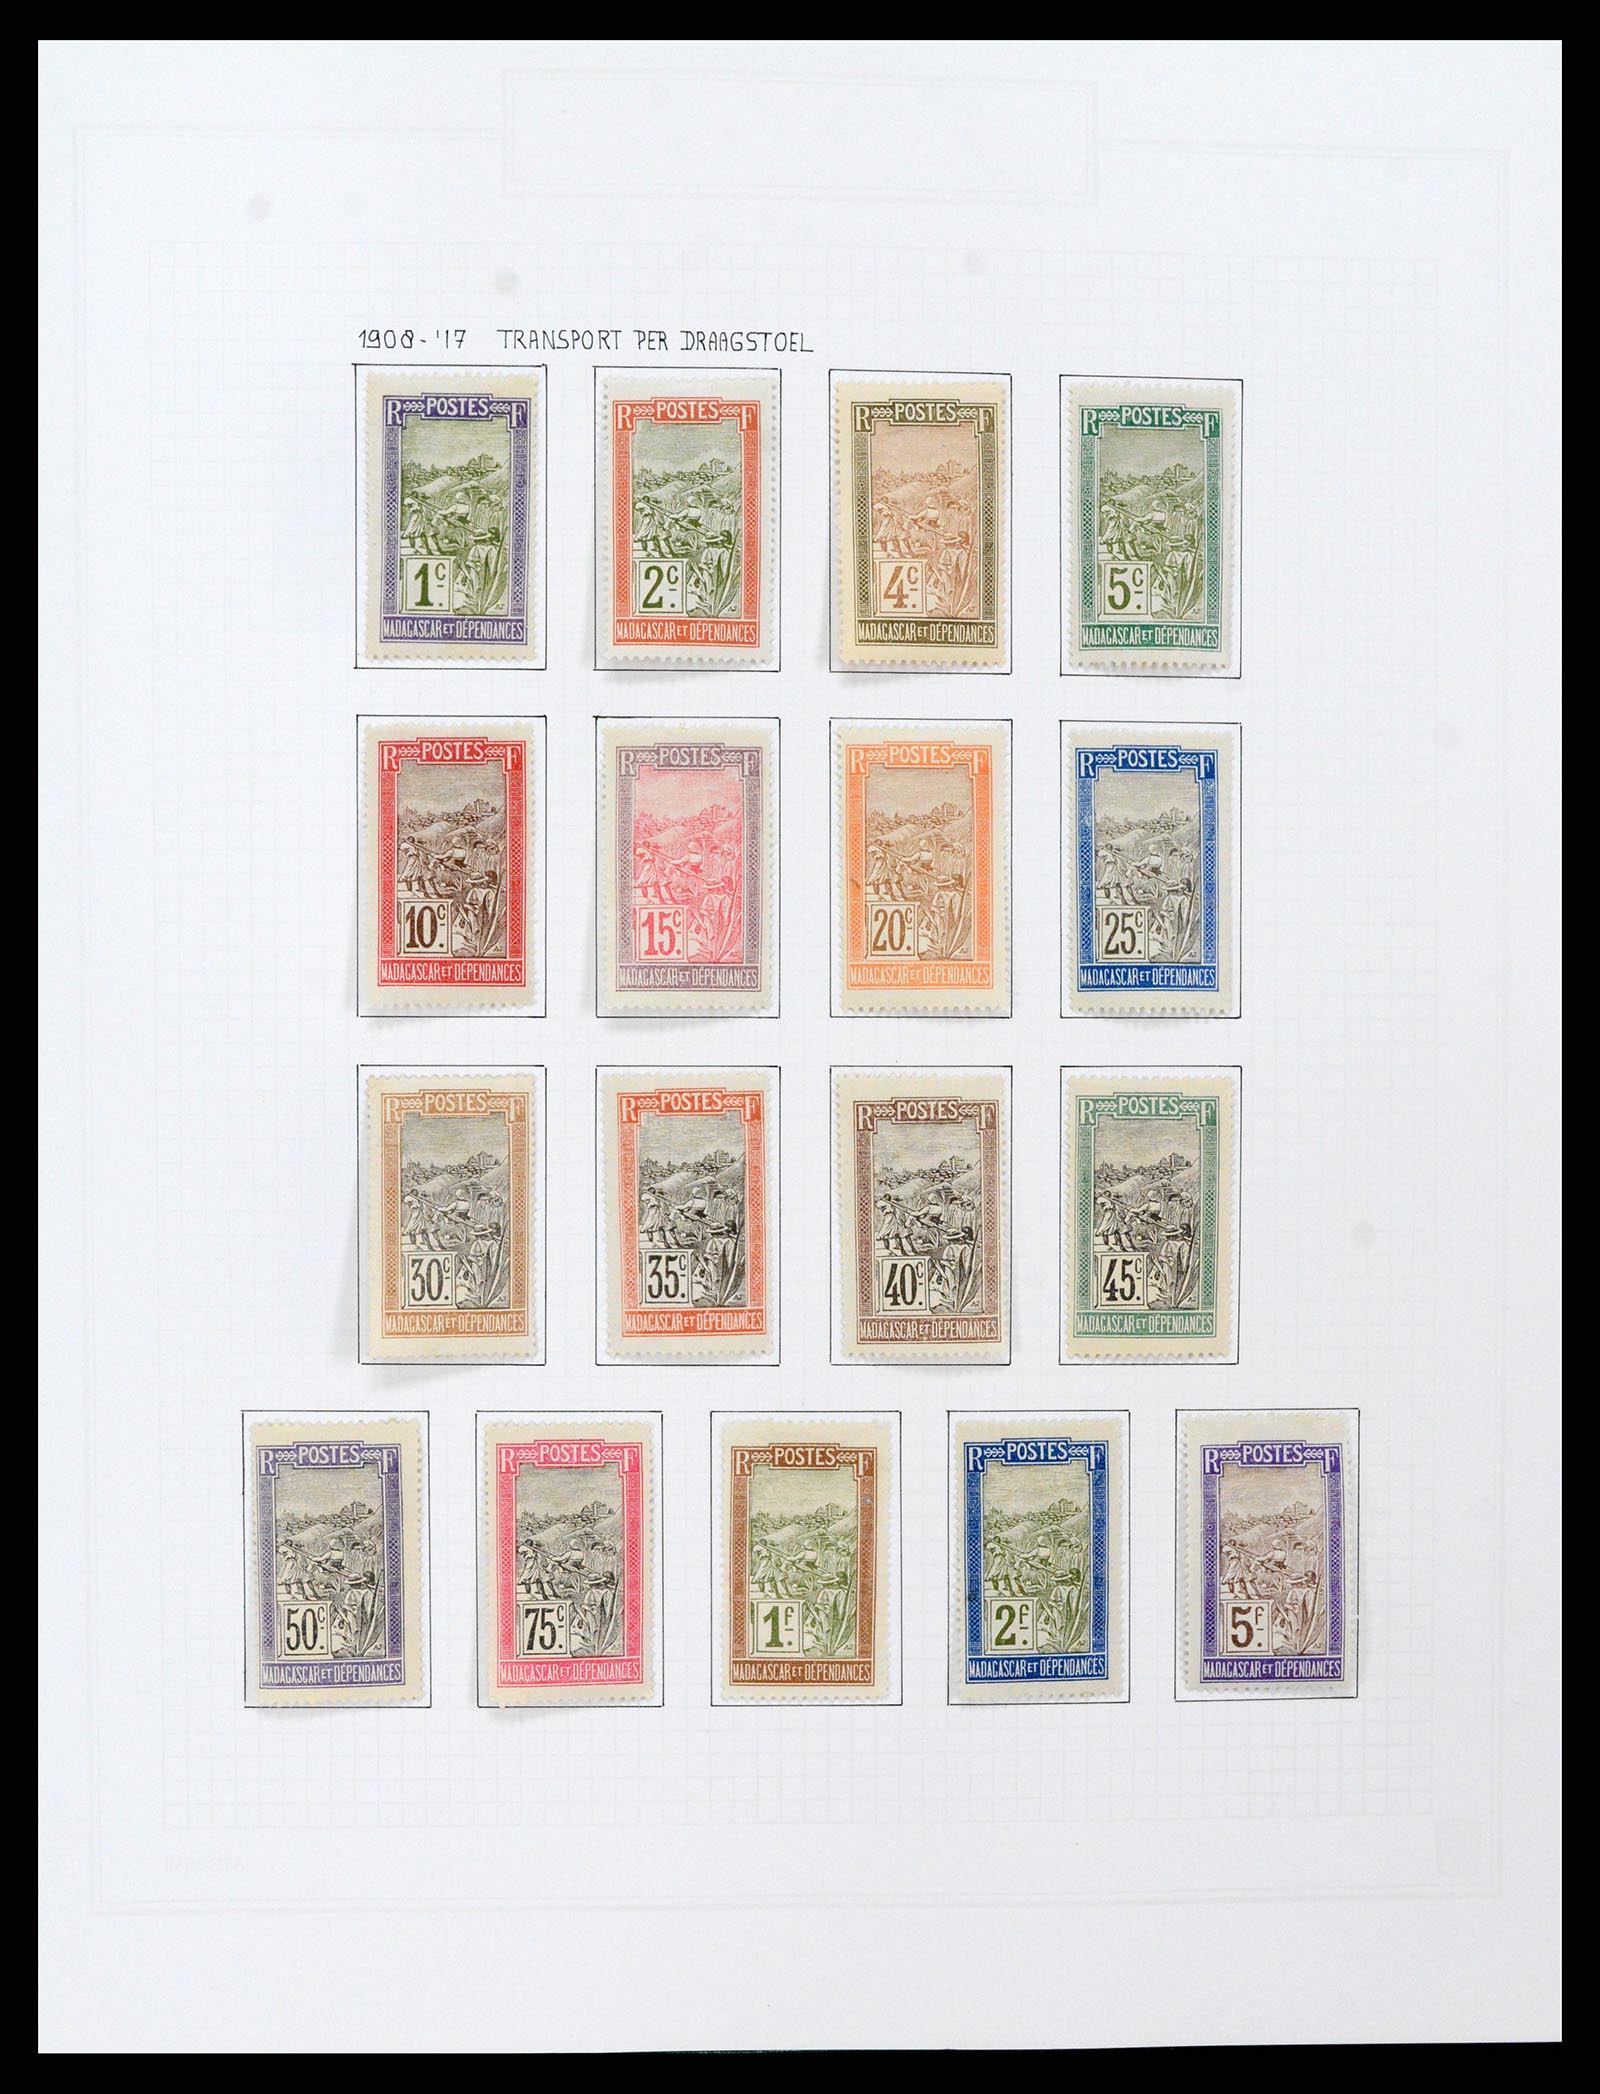 37473 021 - Stamp collection 37473 French Colonies 1888-1957.